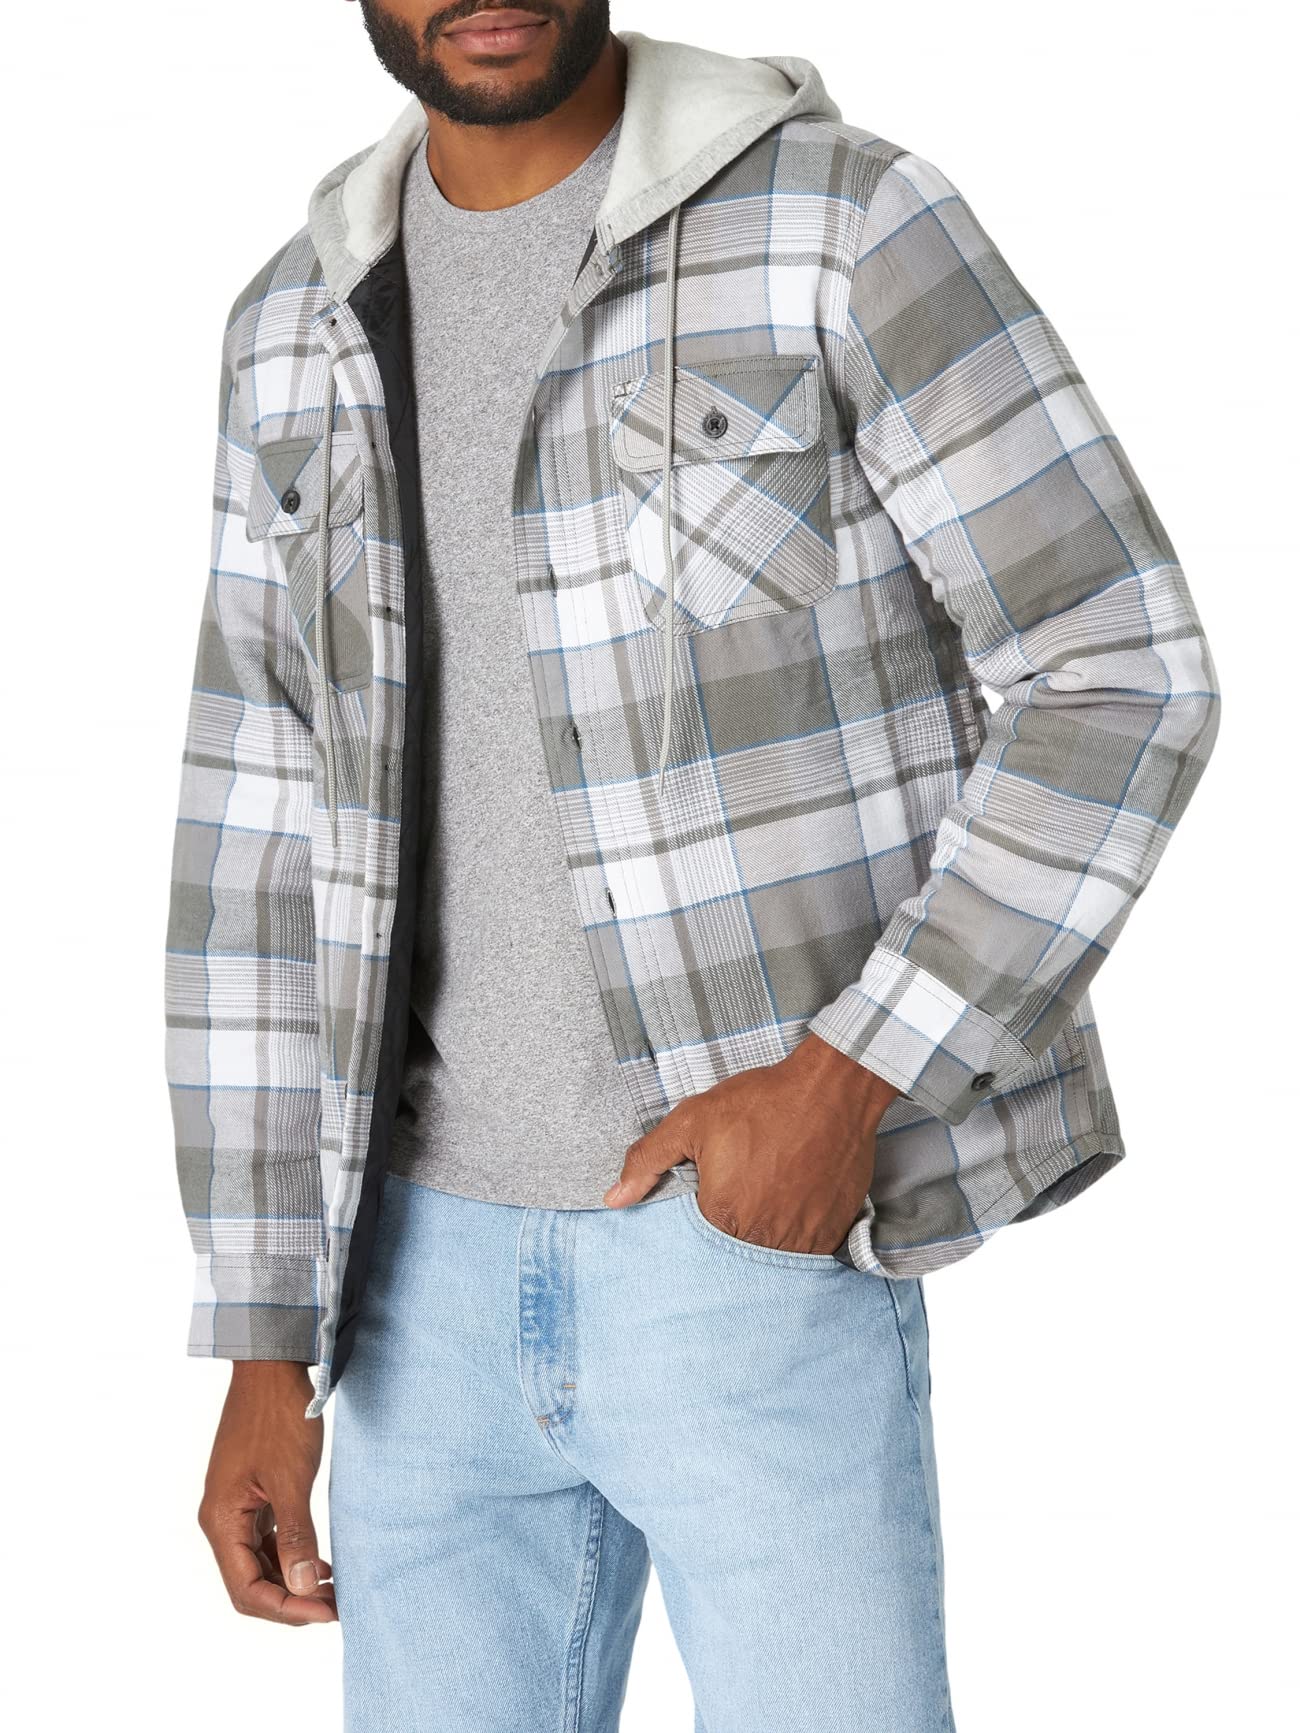 Wrangler Authentics Men's Long Sleeve Quilted Lined Flannel Shirt Jacket with Hood, Gray, 3X-Large